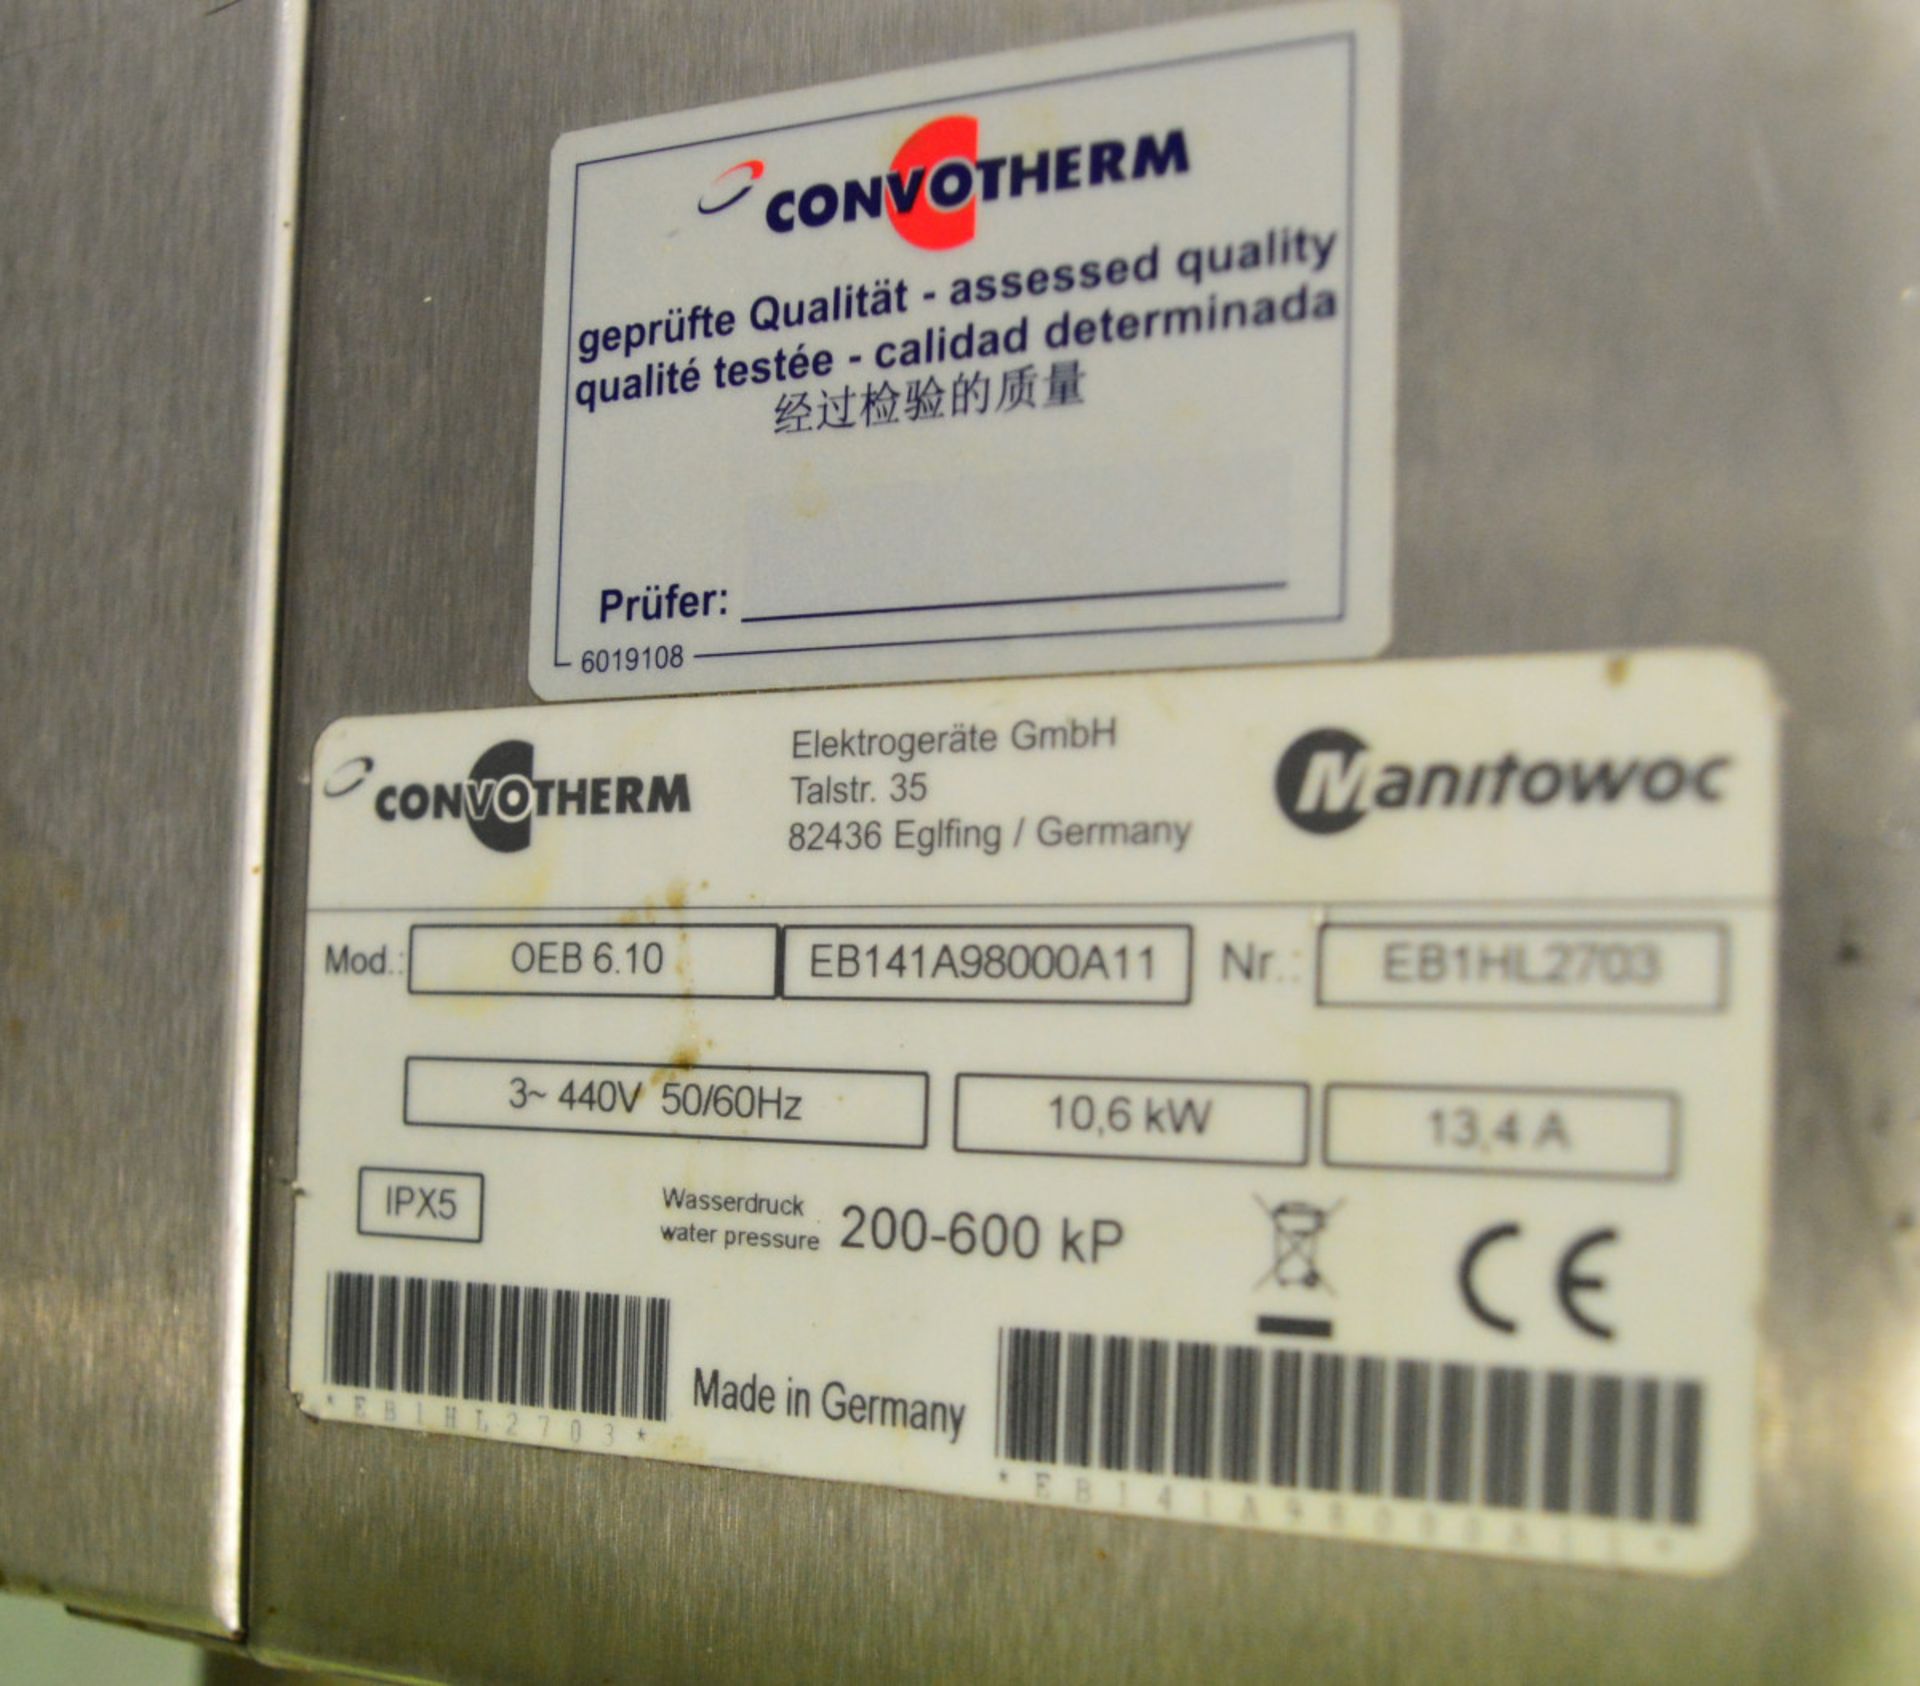 Convotherm Oven OEB 610 10.6kW 440V 50/60Hz - Image 5 of 5